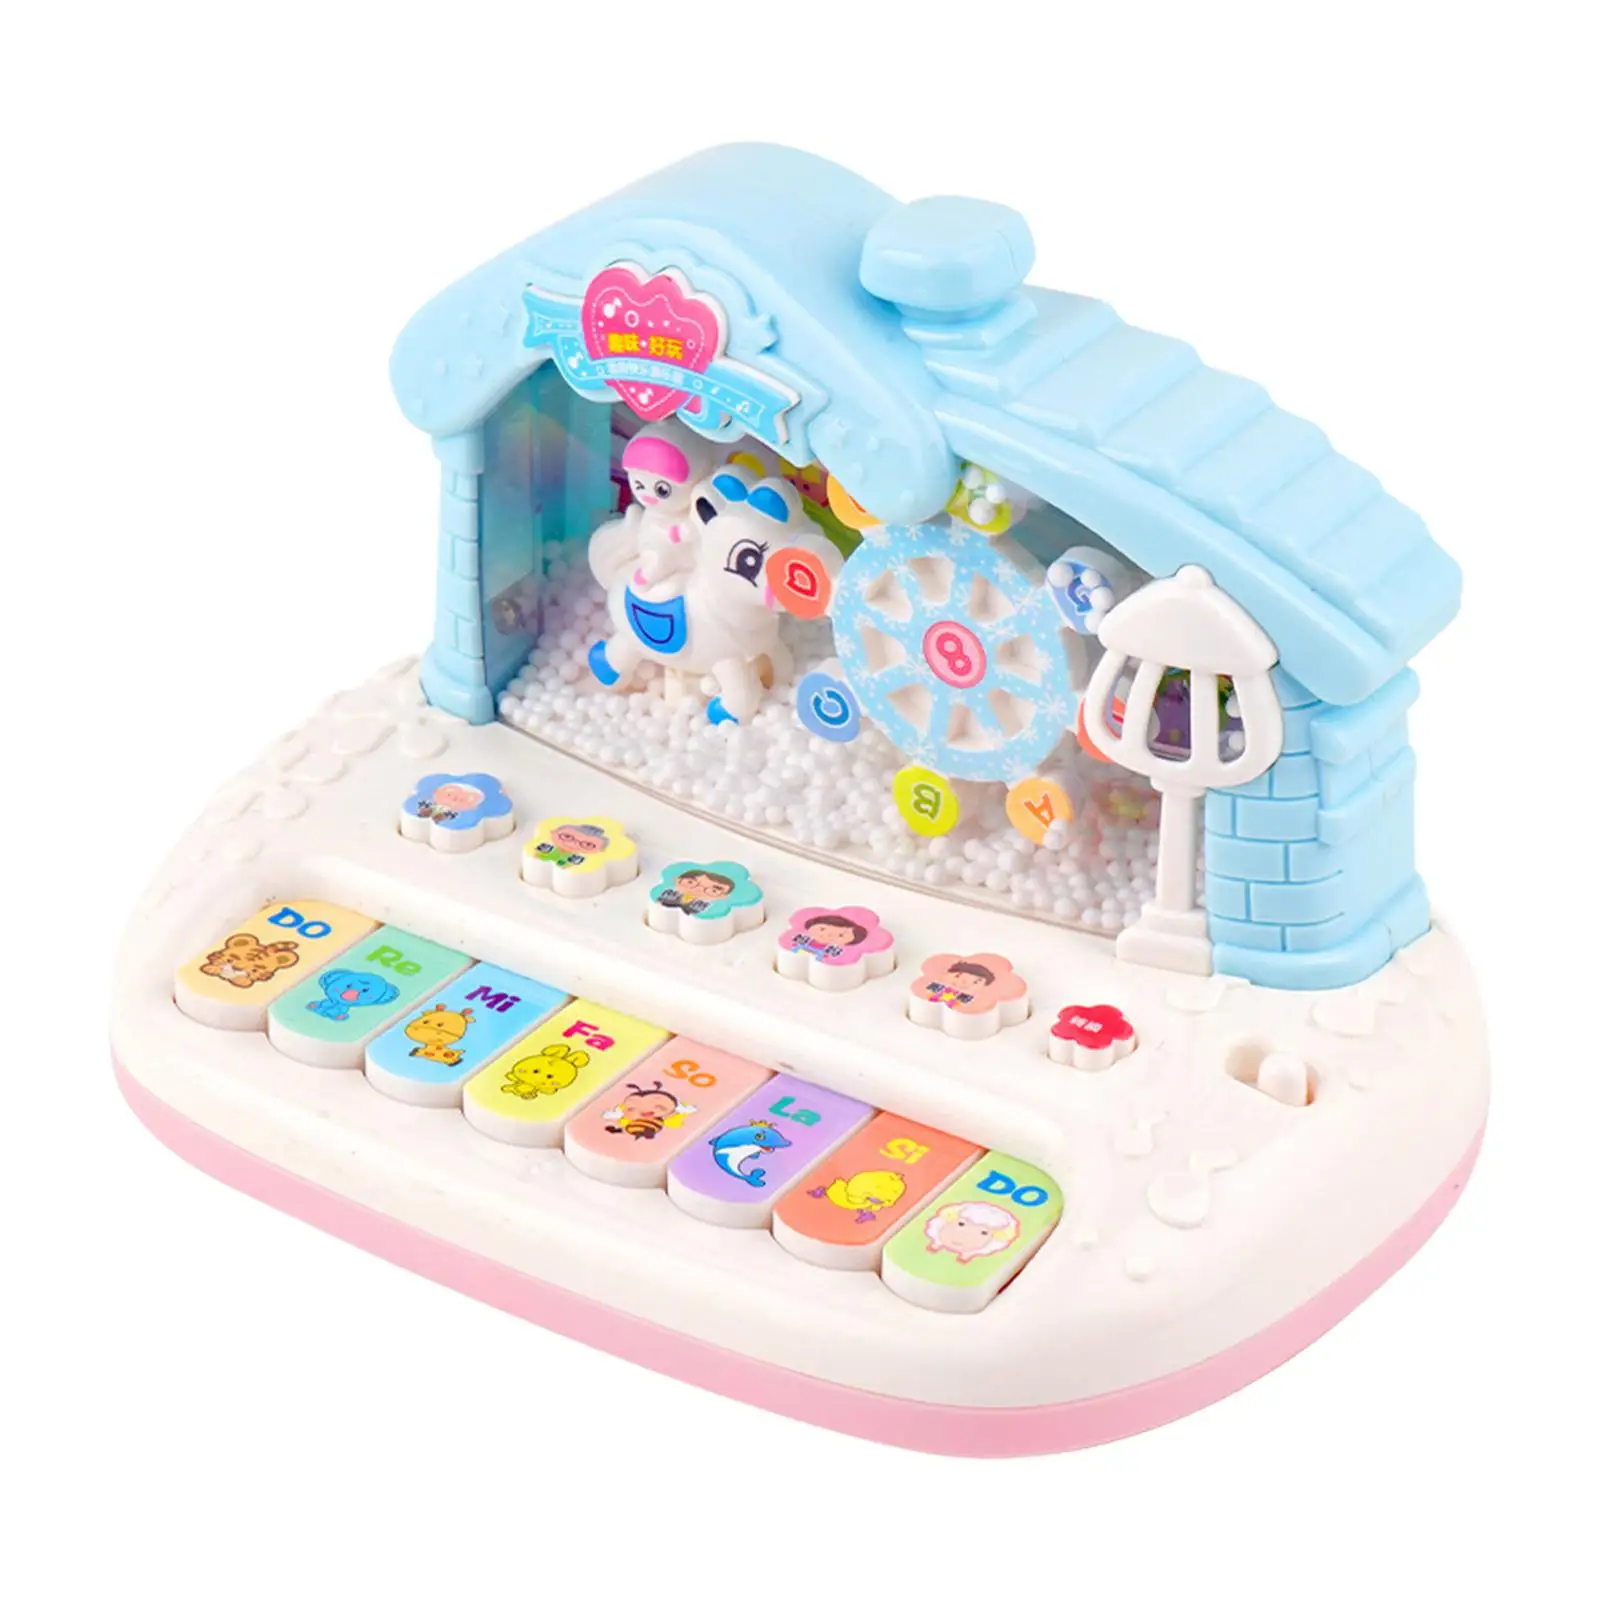 Simulation Musical Instrument Electronic Piano Toy for Kids 1 2 3 Year Old